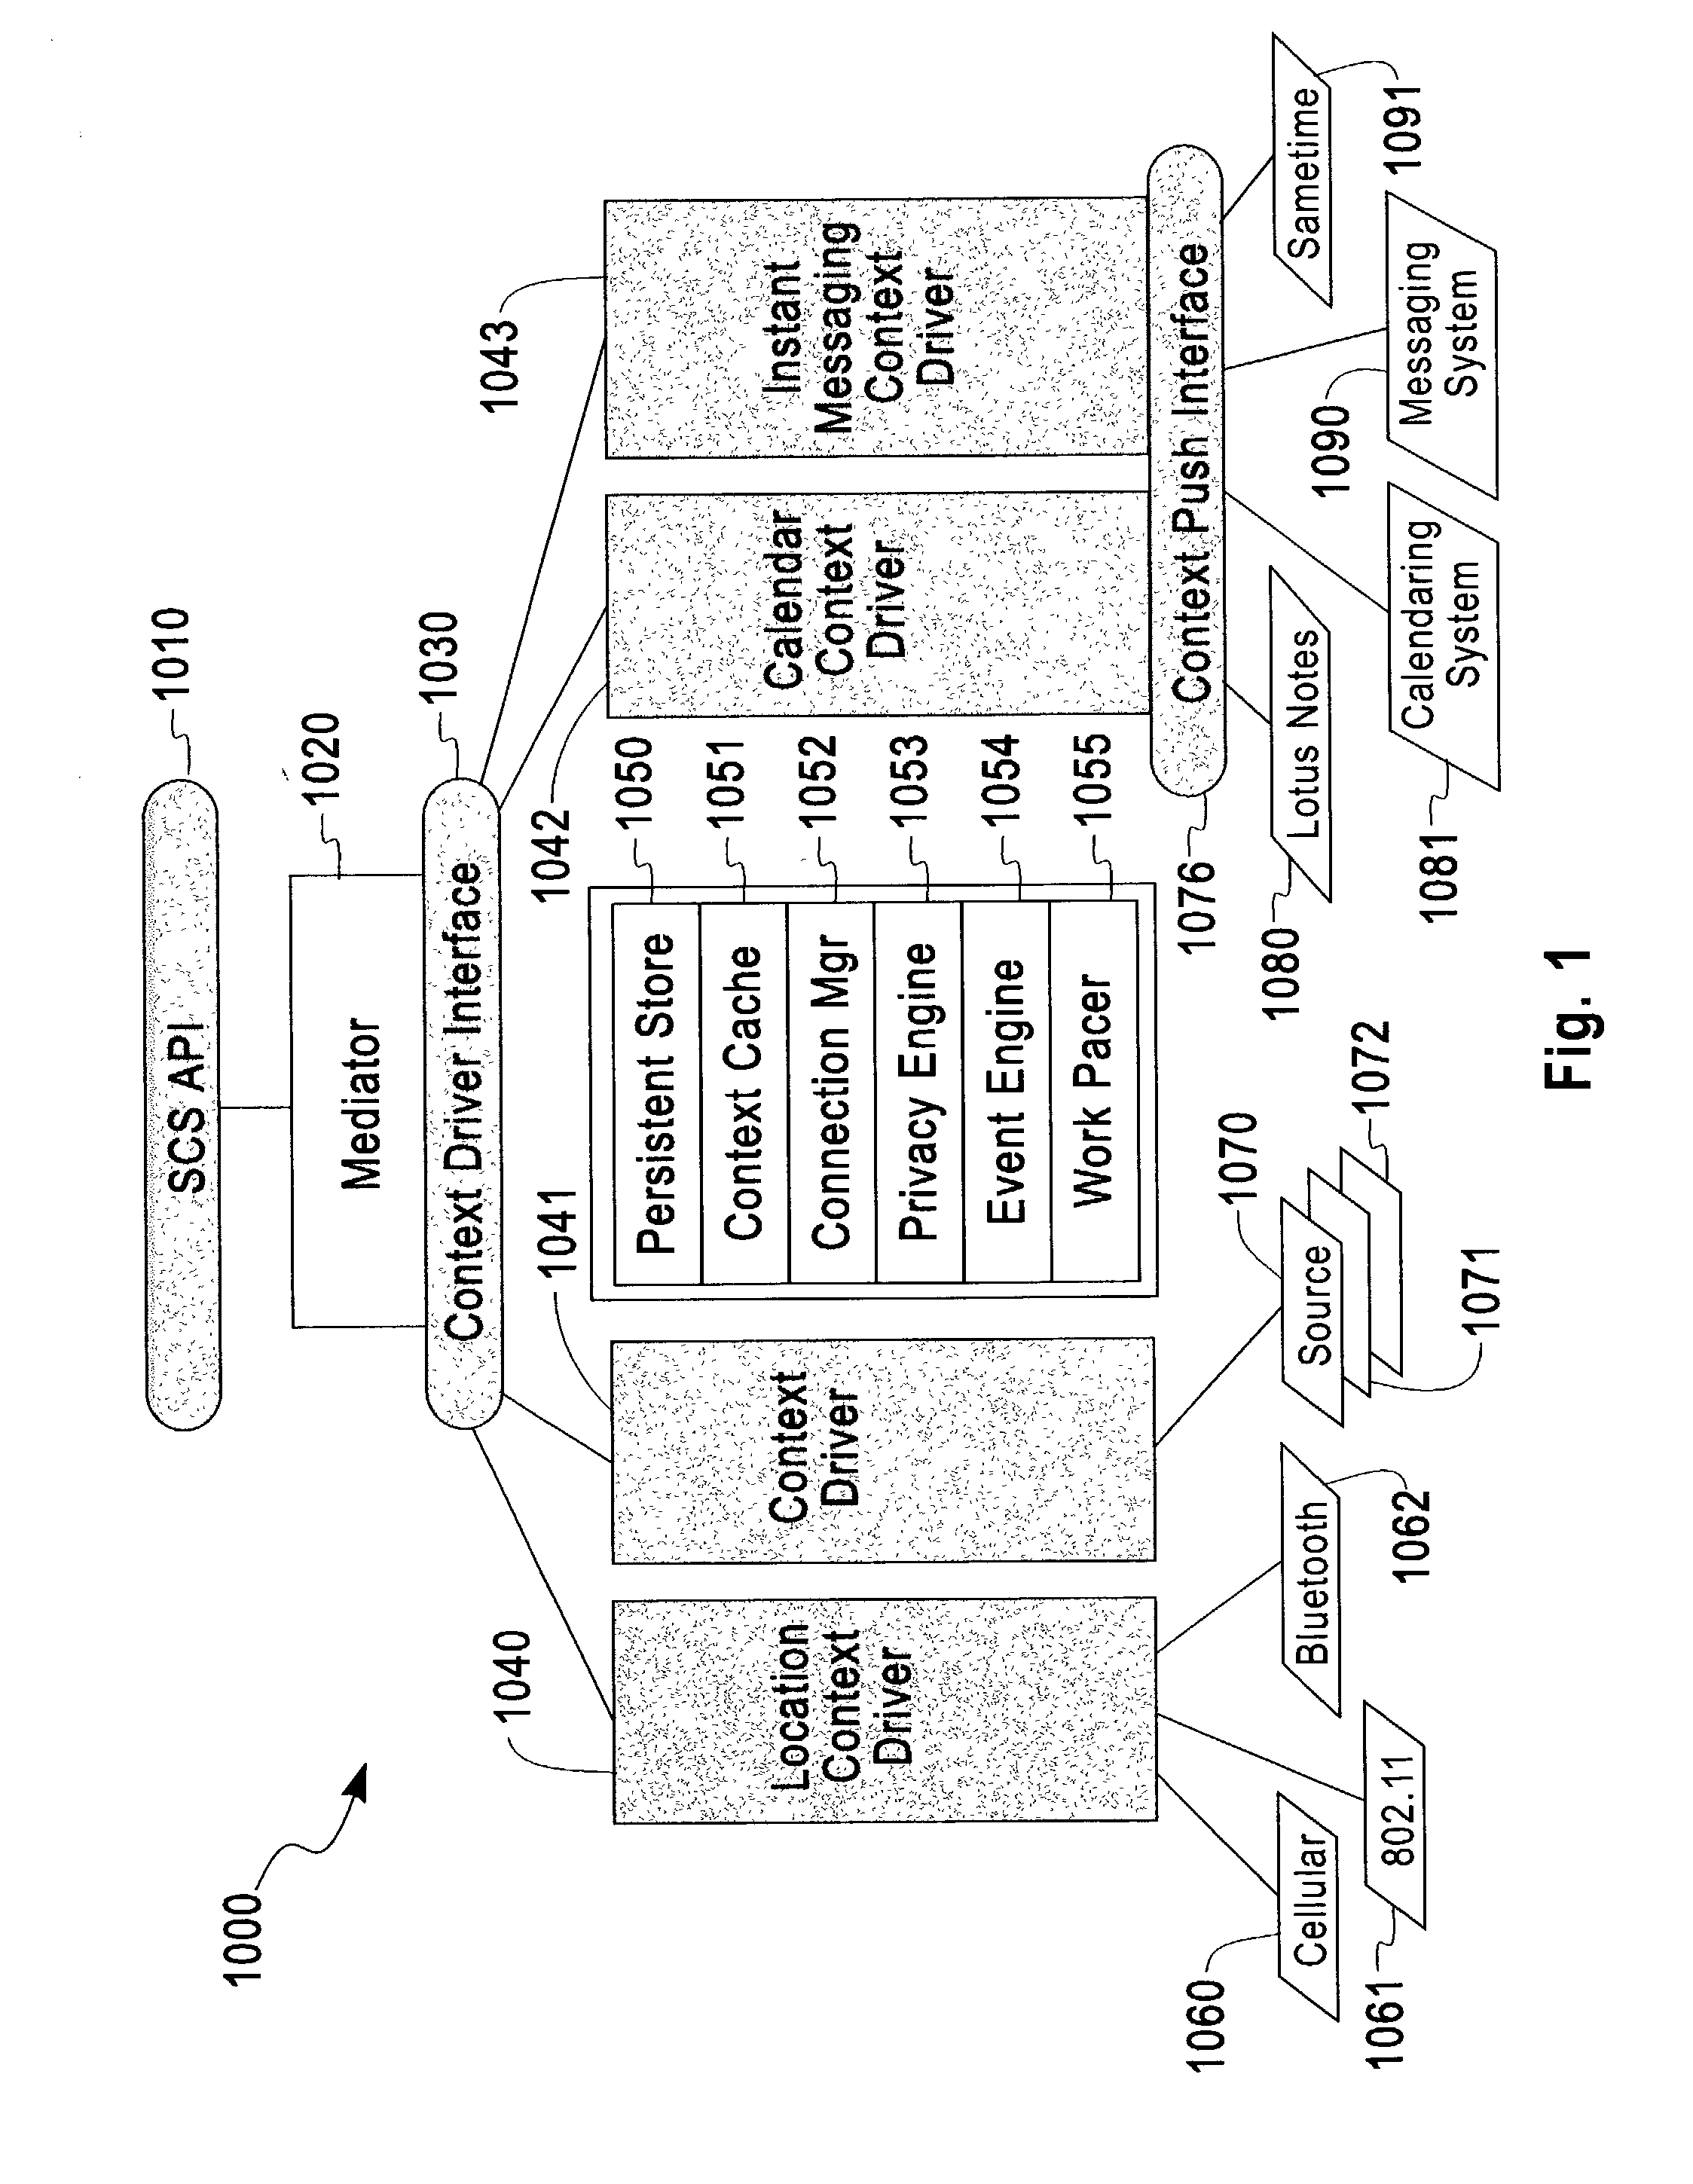 Method and apparatus for providing a flexible and scalable context service